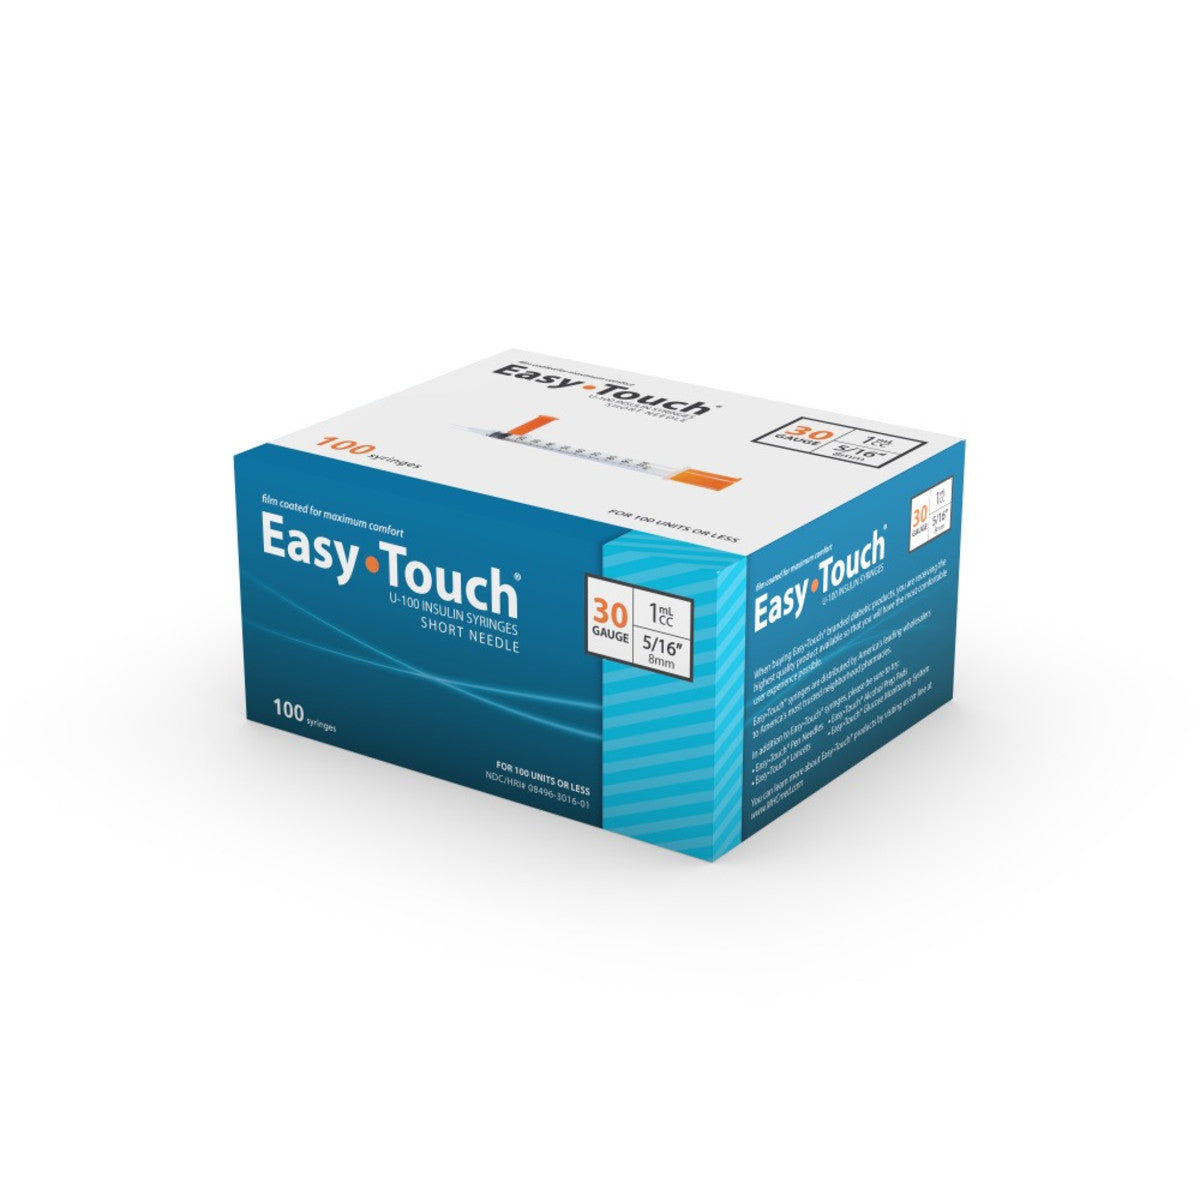 Easy Touch Insulin Syringe, 30G 1cc 5/16-Inch (8mm), 830165, Box of 100